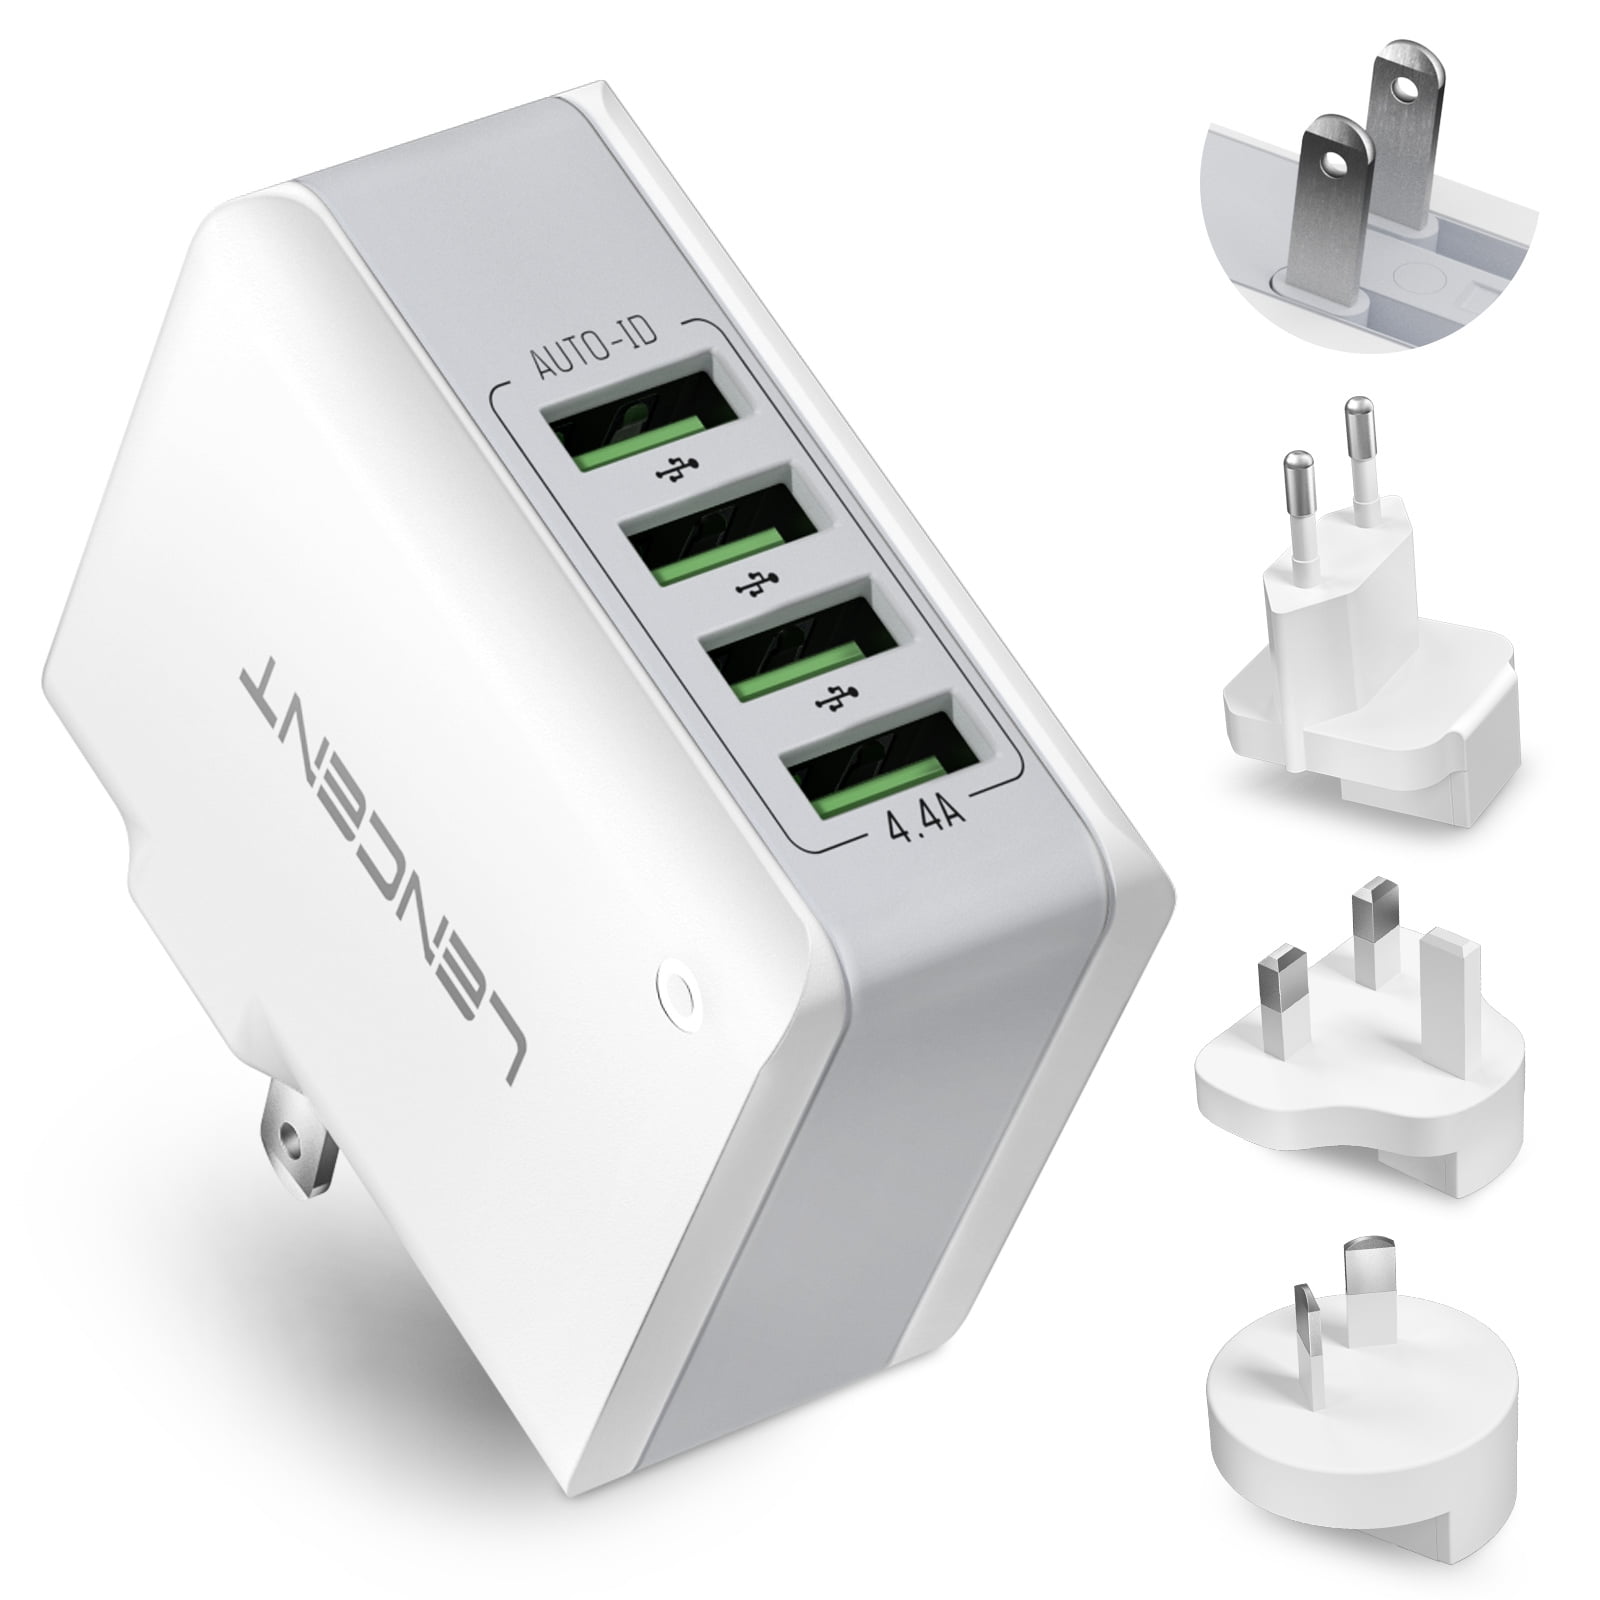 Multiple 4 Ports USB Wall Charger, Travel Power Adapter, Cell Phone Charger With UK US EU European Australia - Walmart.com